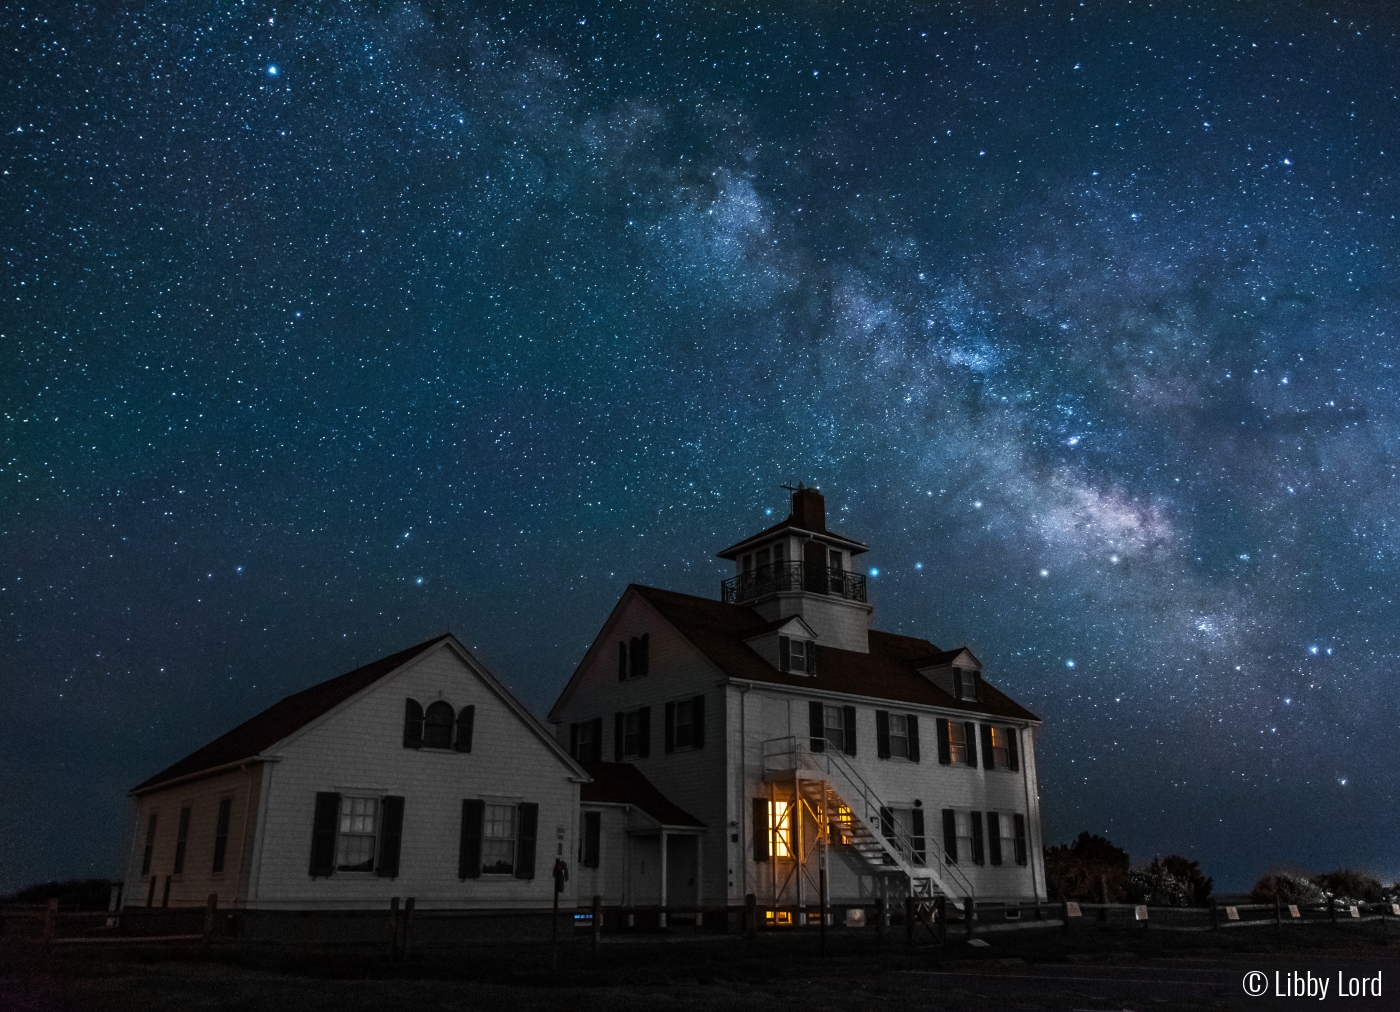 Coast Guard Station Under the Stars by Libby Lord